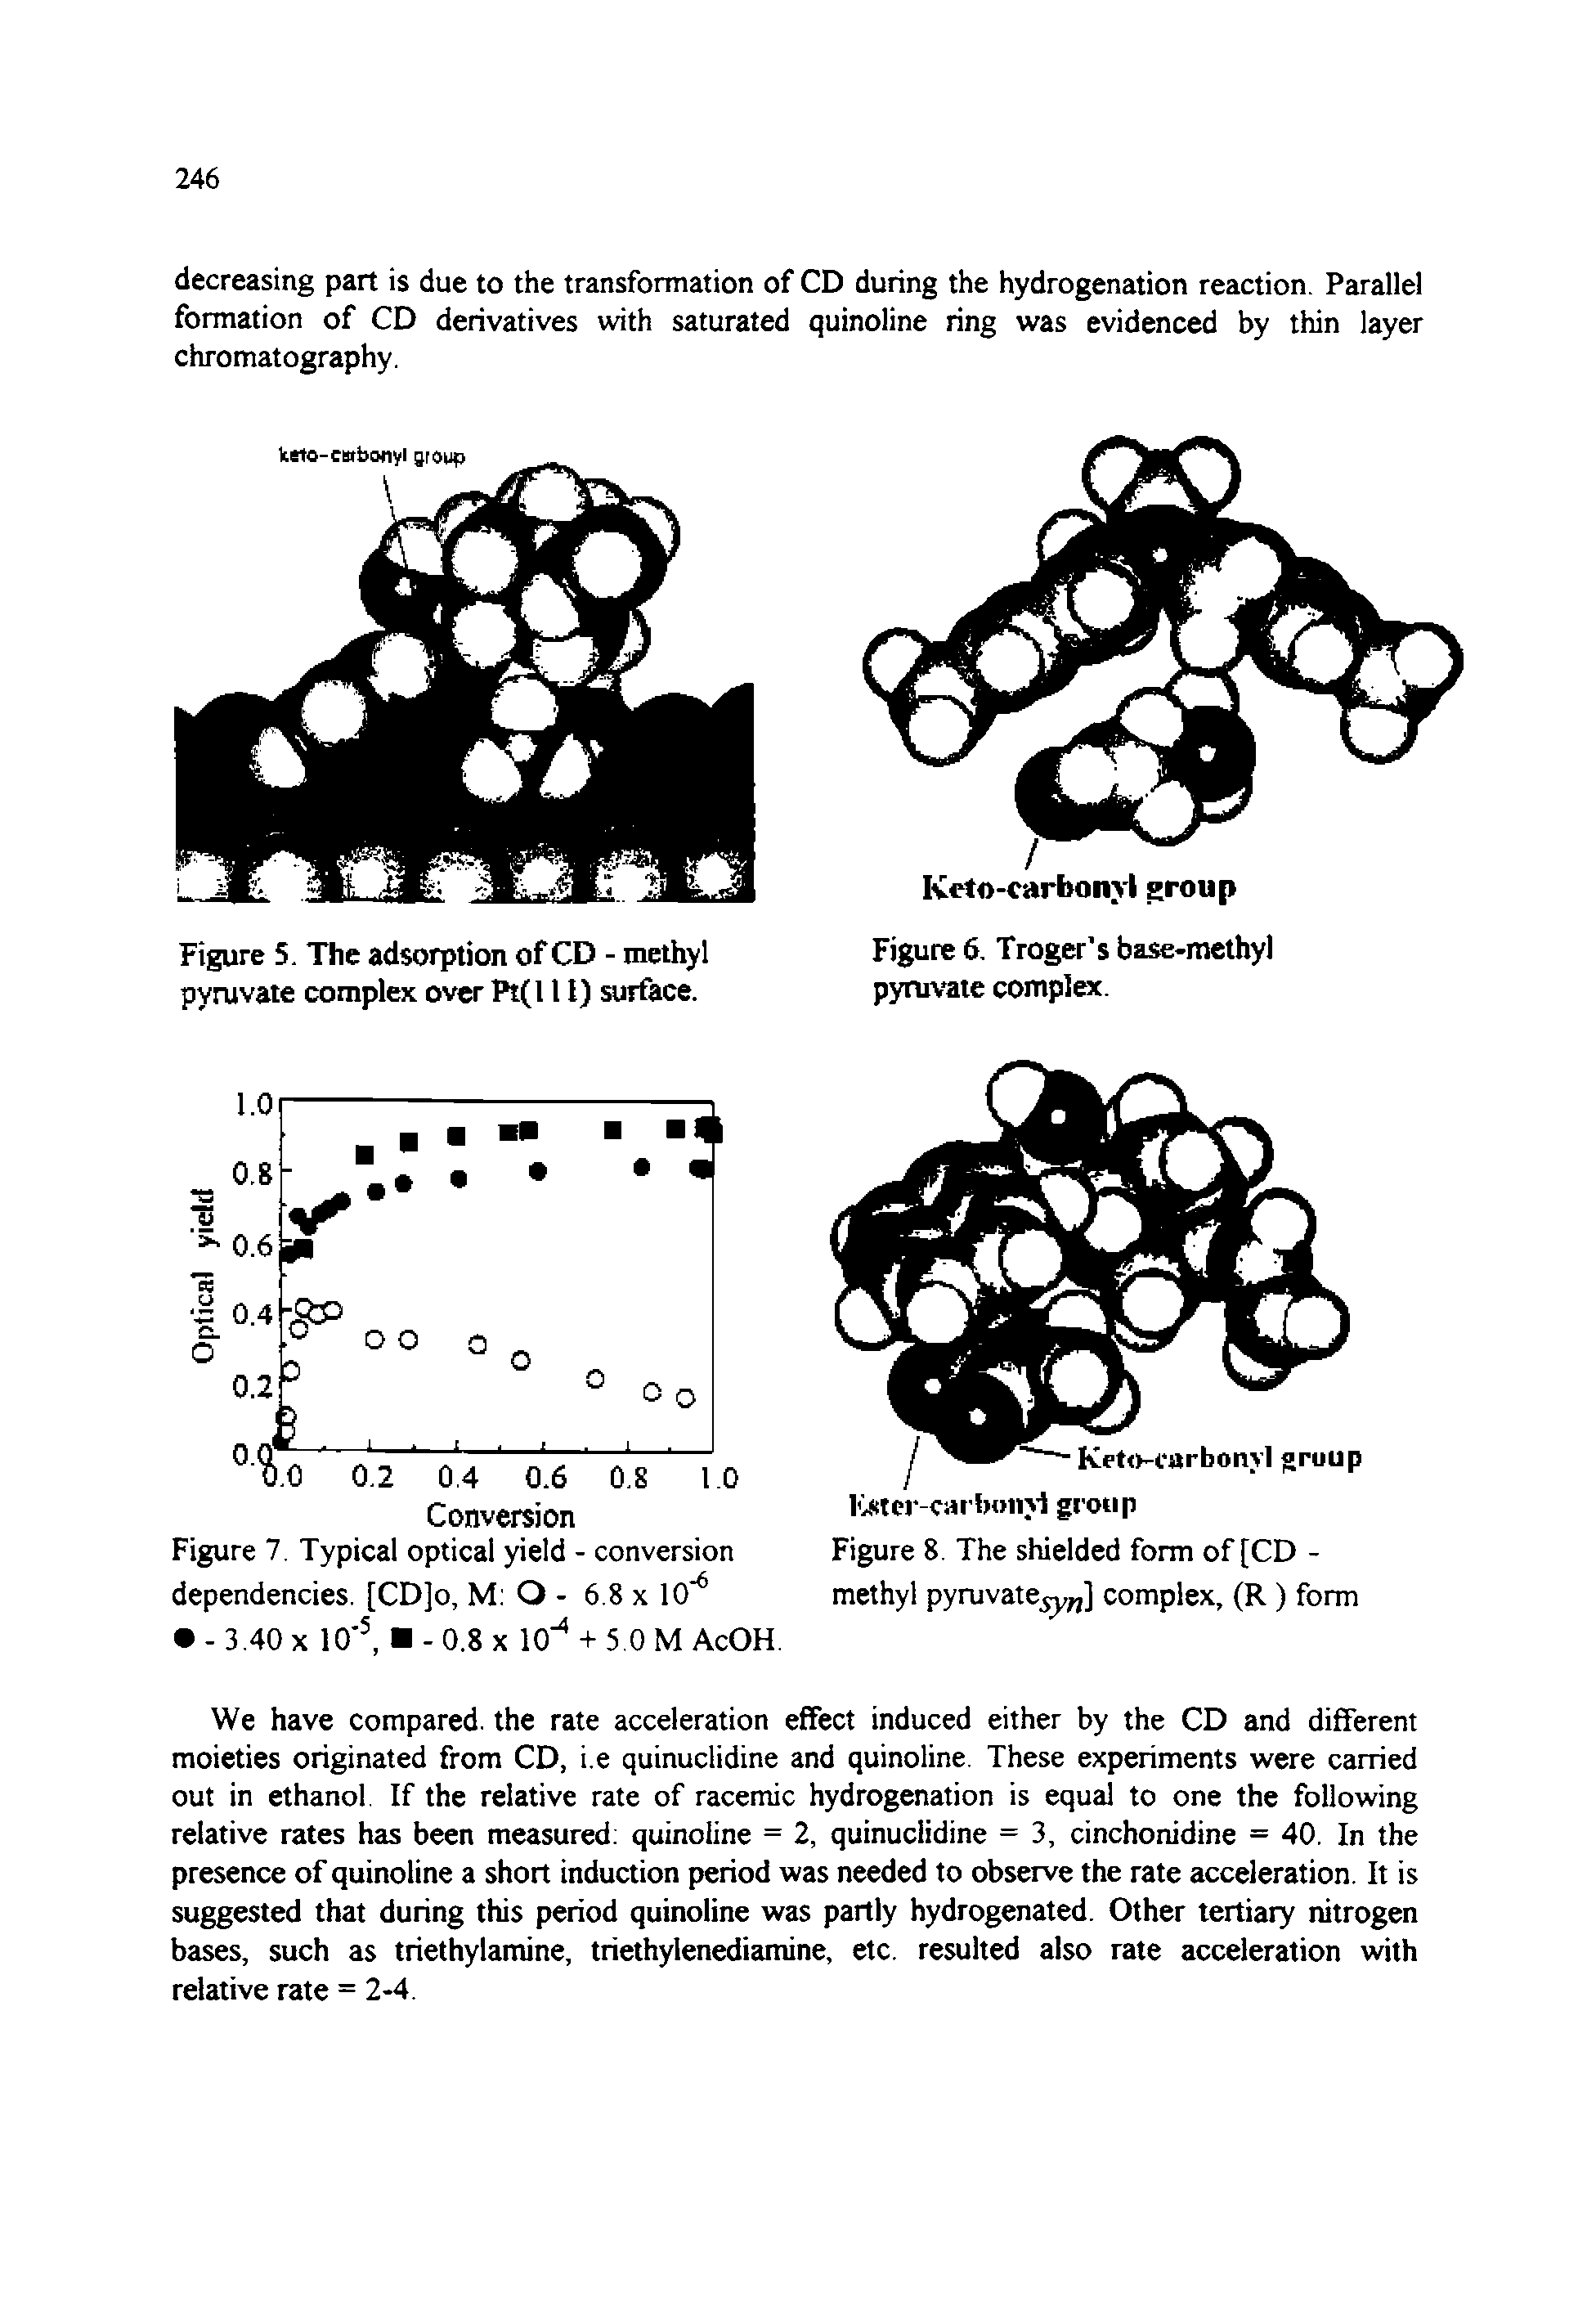 Figure 5. The adsorption of CD - methyl pyruvate complex over Pt(l 11) surface.